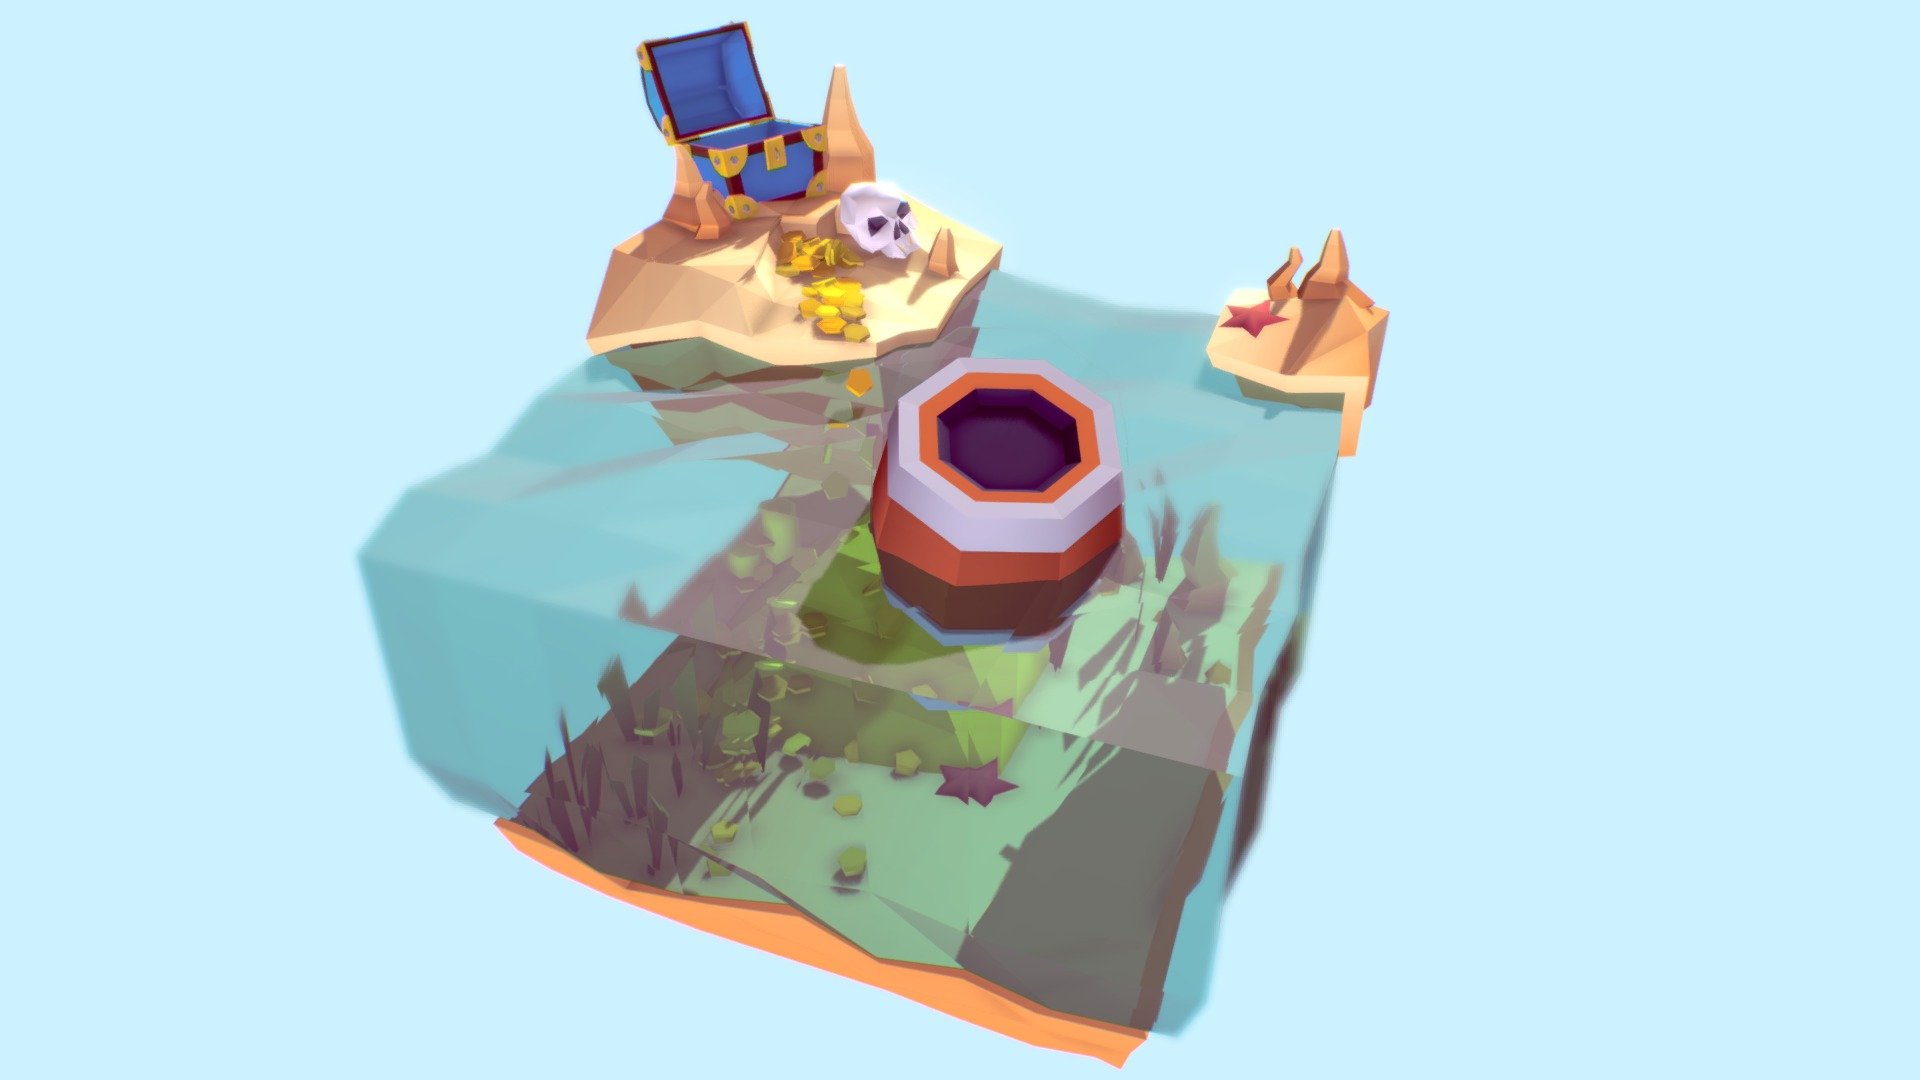 Low poly isometric style model done in Maya, textured in Photoshop
.
Concept art by : https://damianwilbert.wixsite.com/wilbertsportfolio

More render on https://www.artstation.com/artwork/DP2NG - Treasure Island - 3D model by cheffie29 3d model